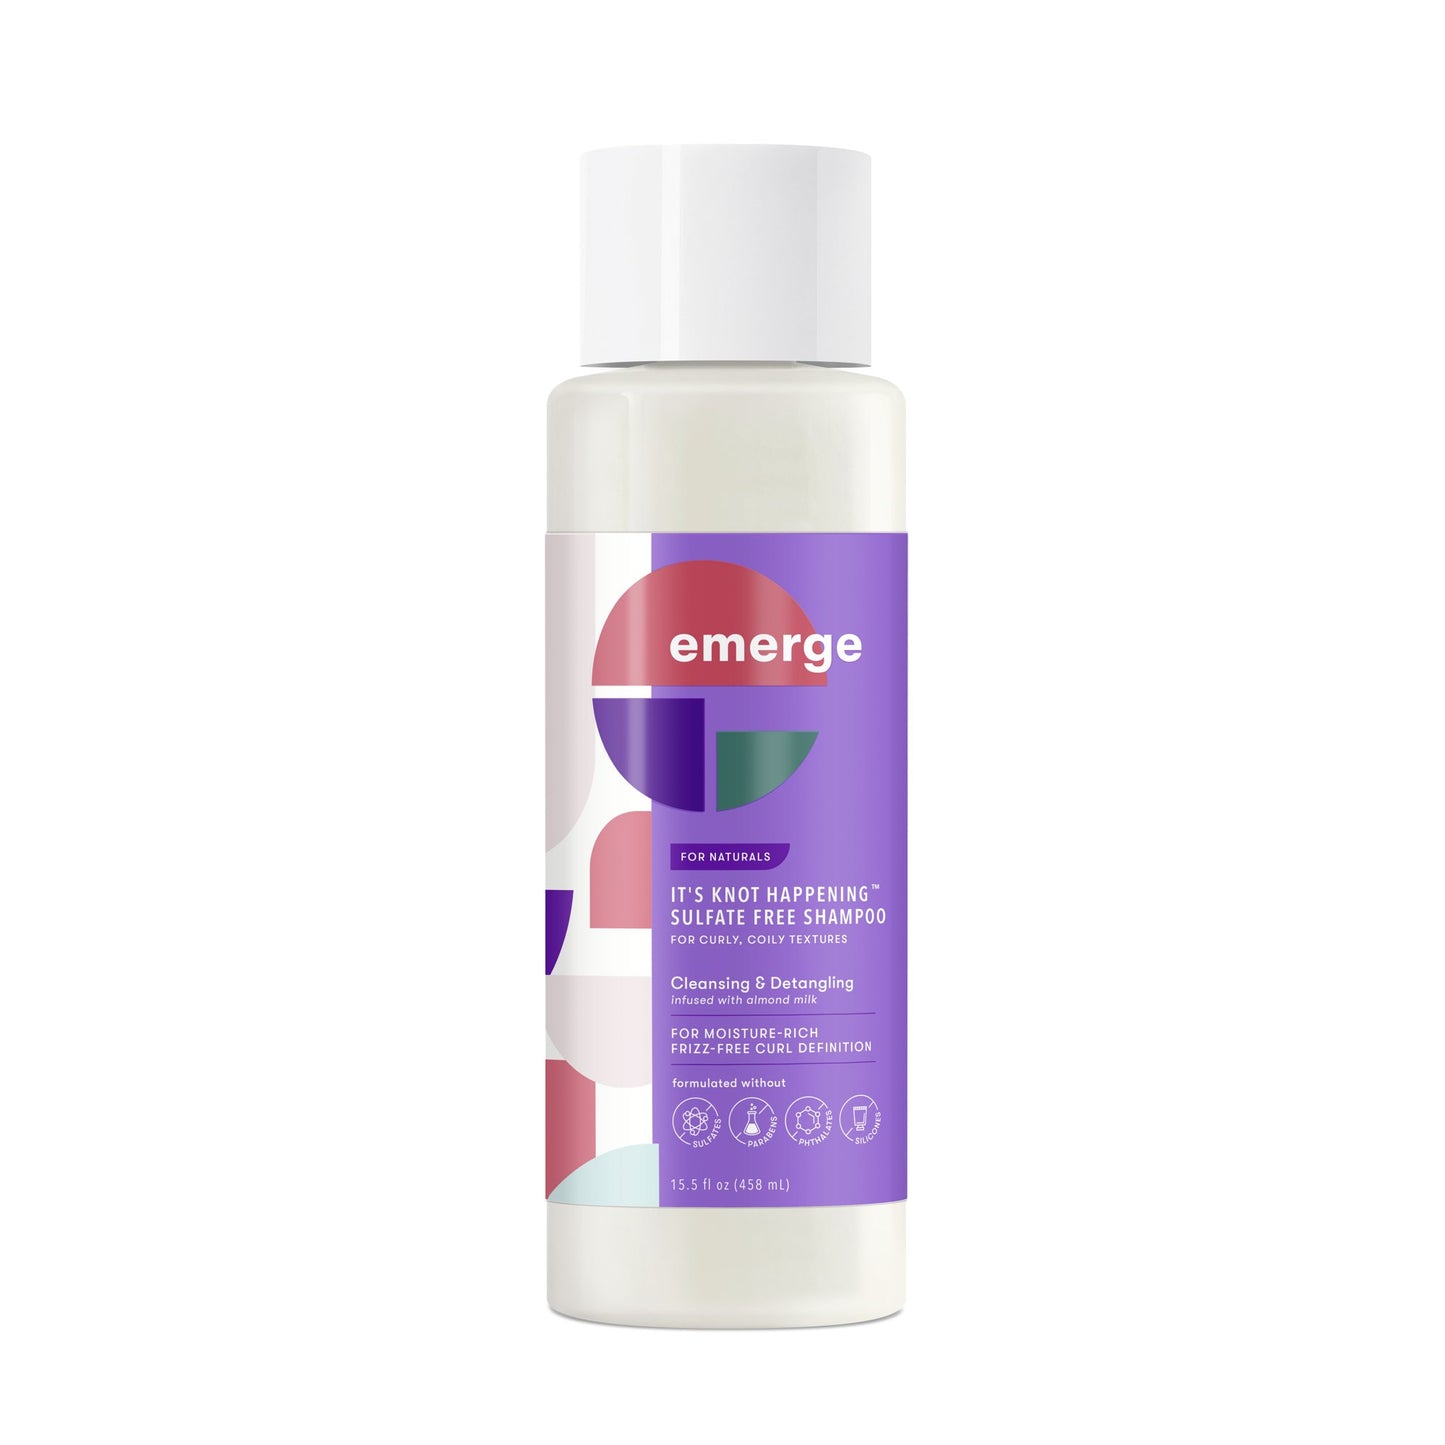 Emerge It’s Knot Happening Detangling Shampoo Sulfate Free 15.5 oz (Case Of 12)